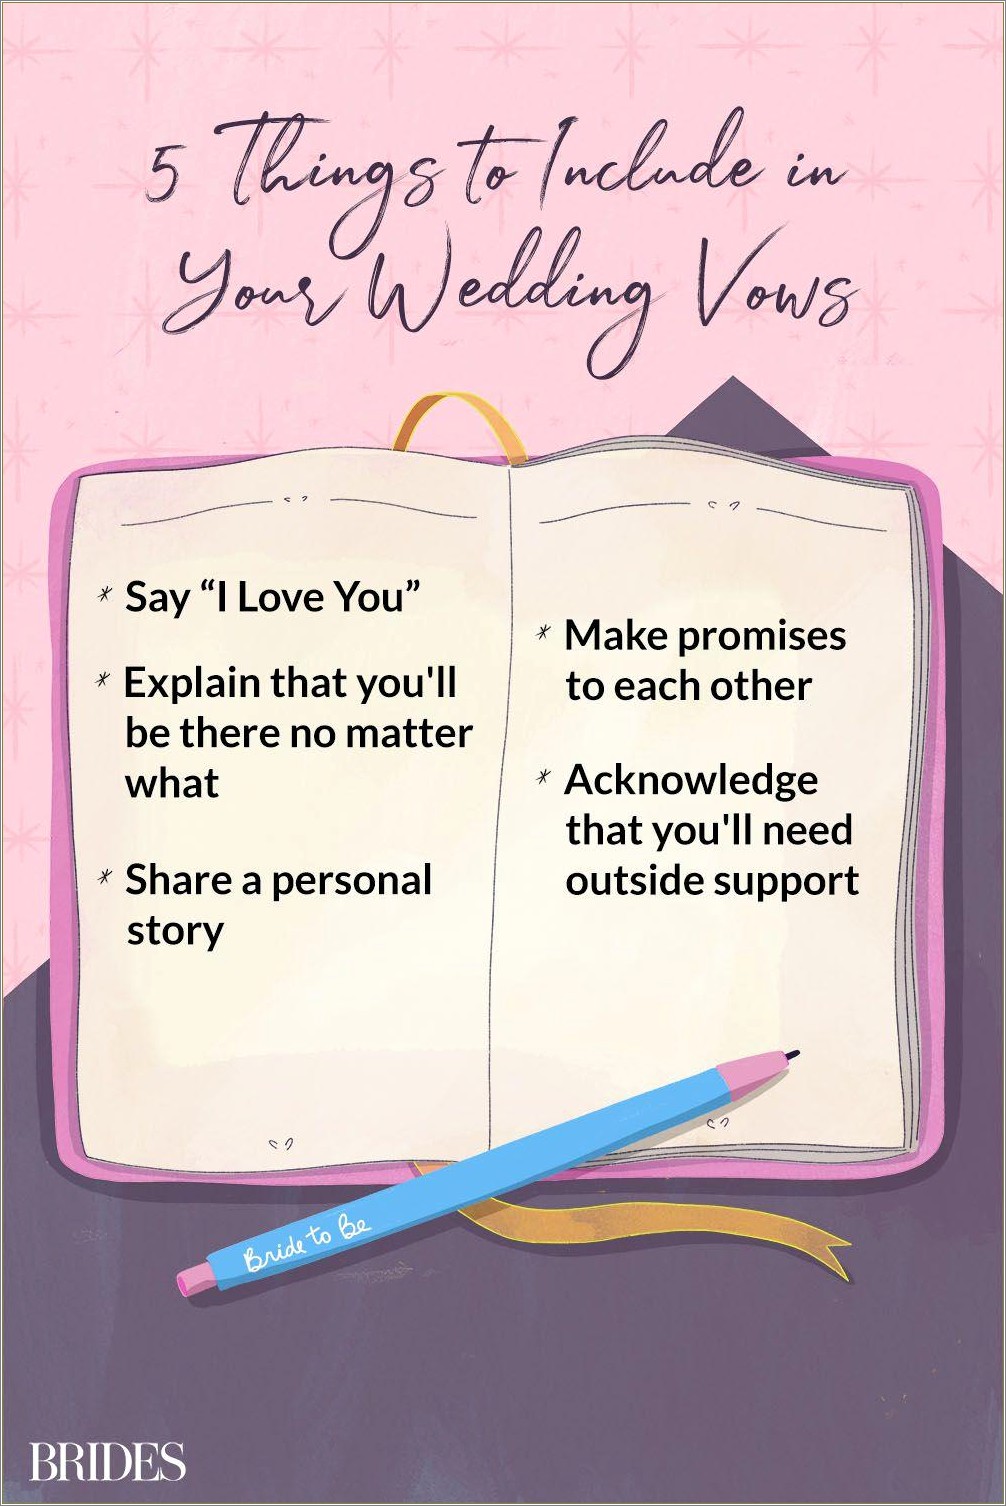 Free Christian Personal Wedding Vows Template